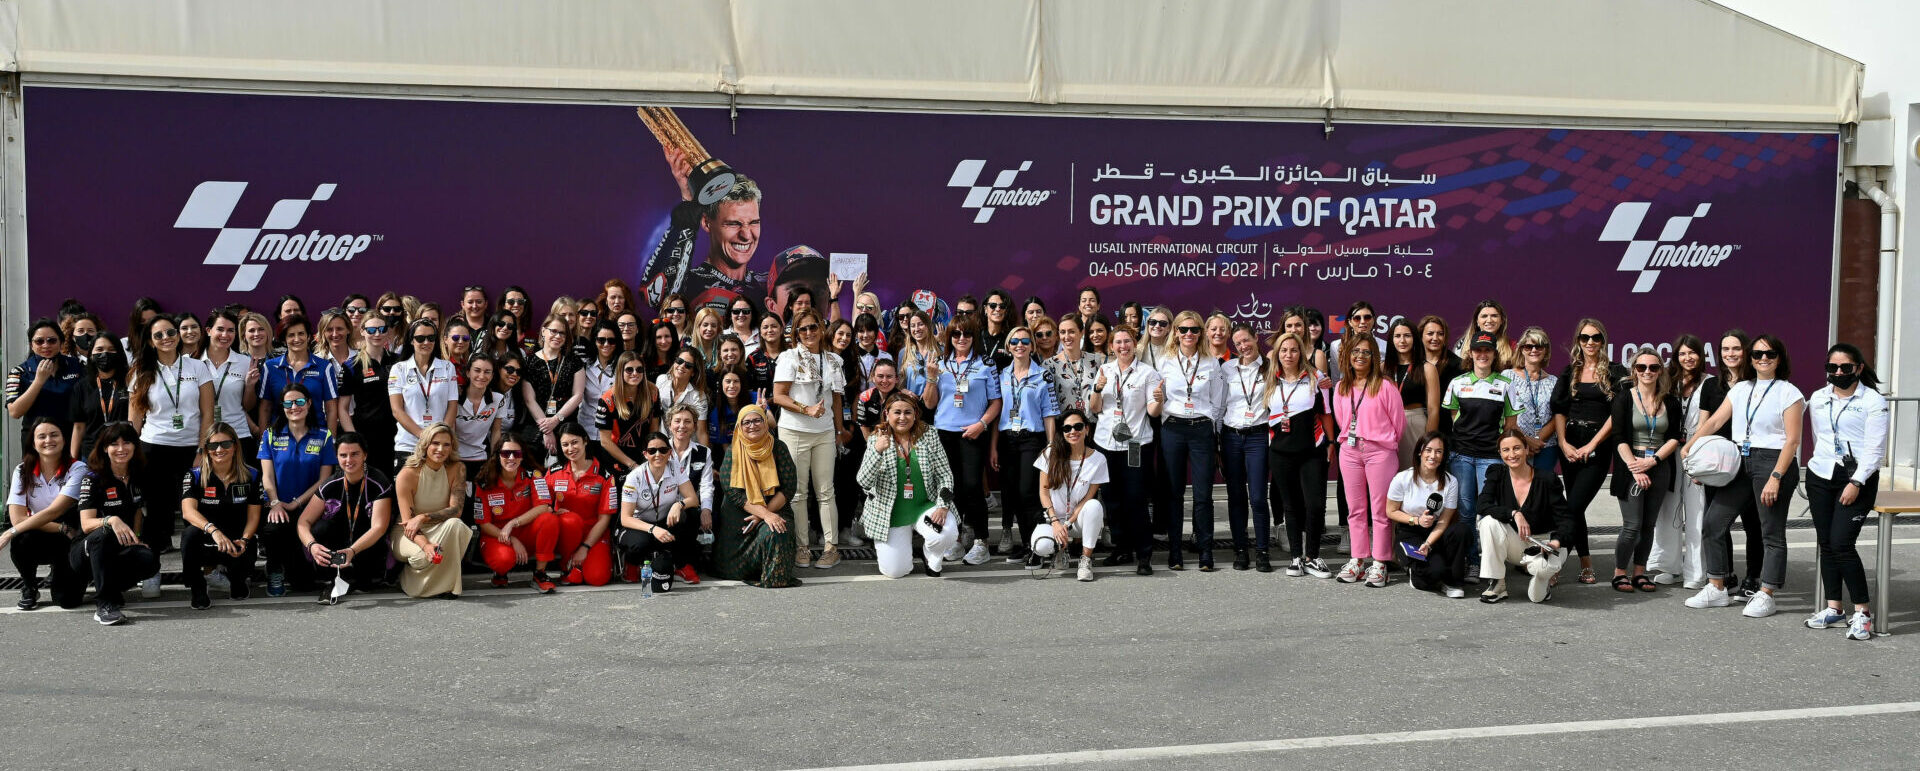 Female team members, officials, and staff at the MotoGP race in Qatar. Photo courtesy FIM.